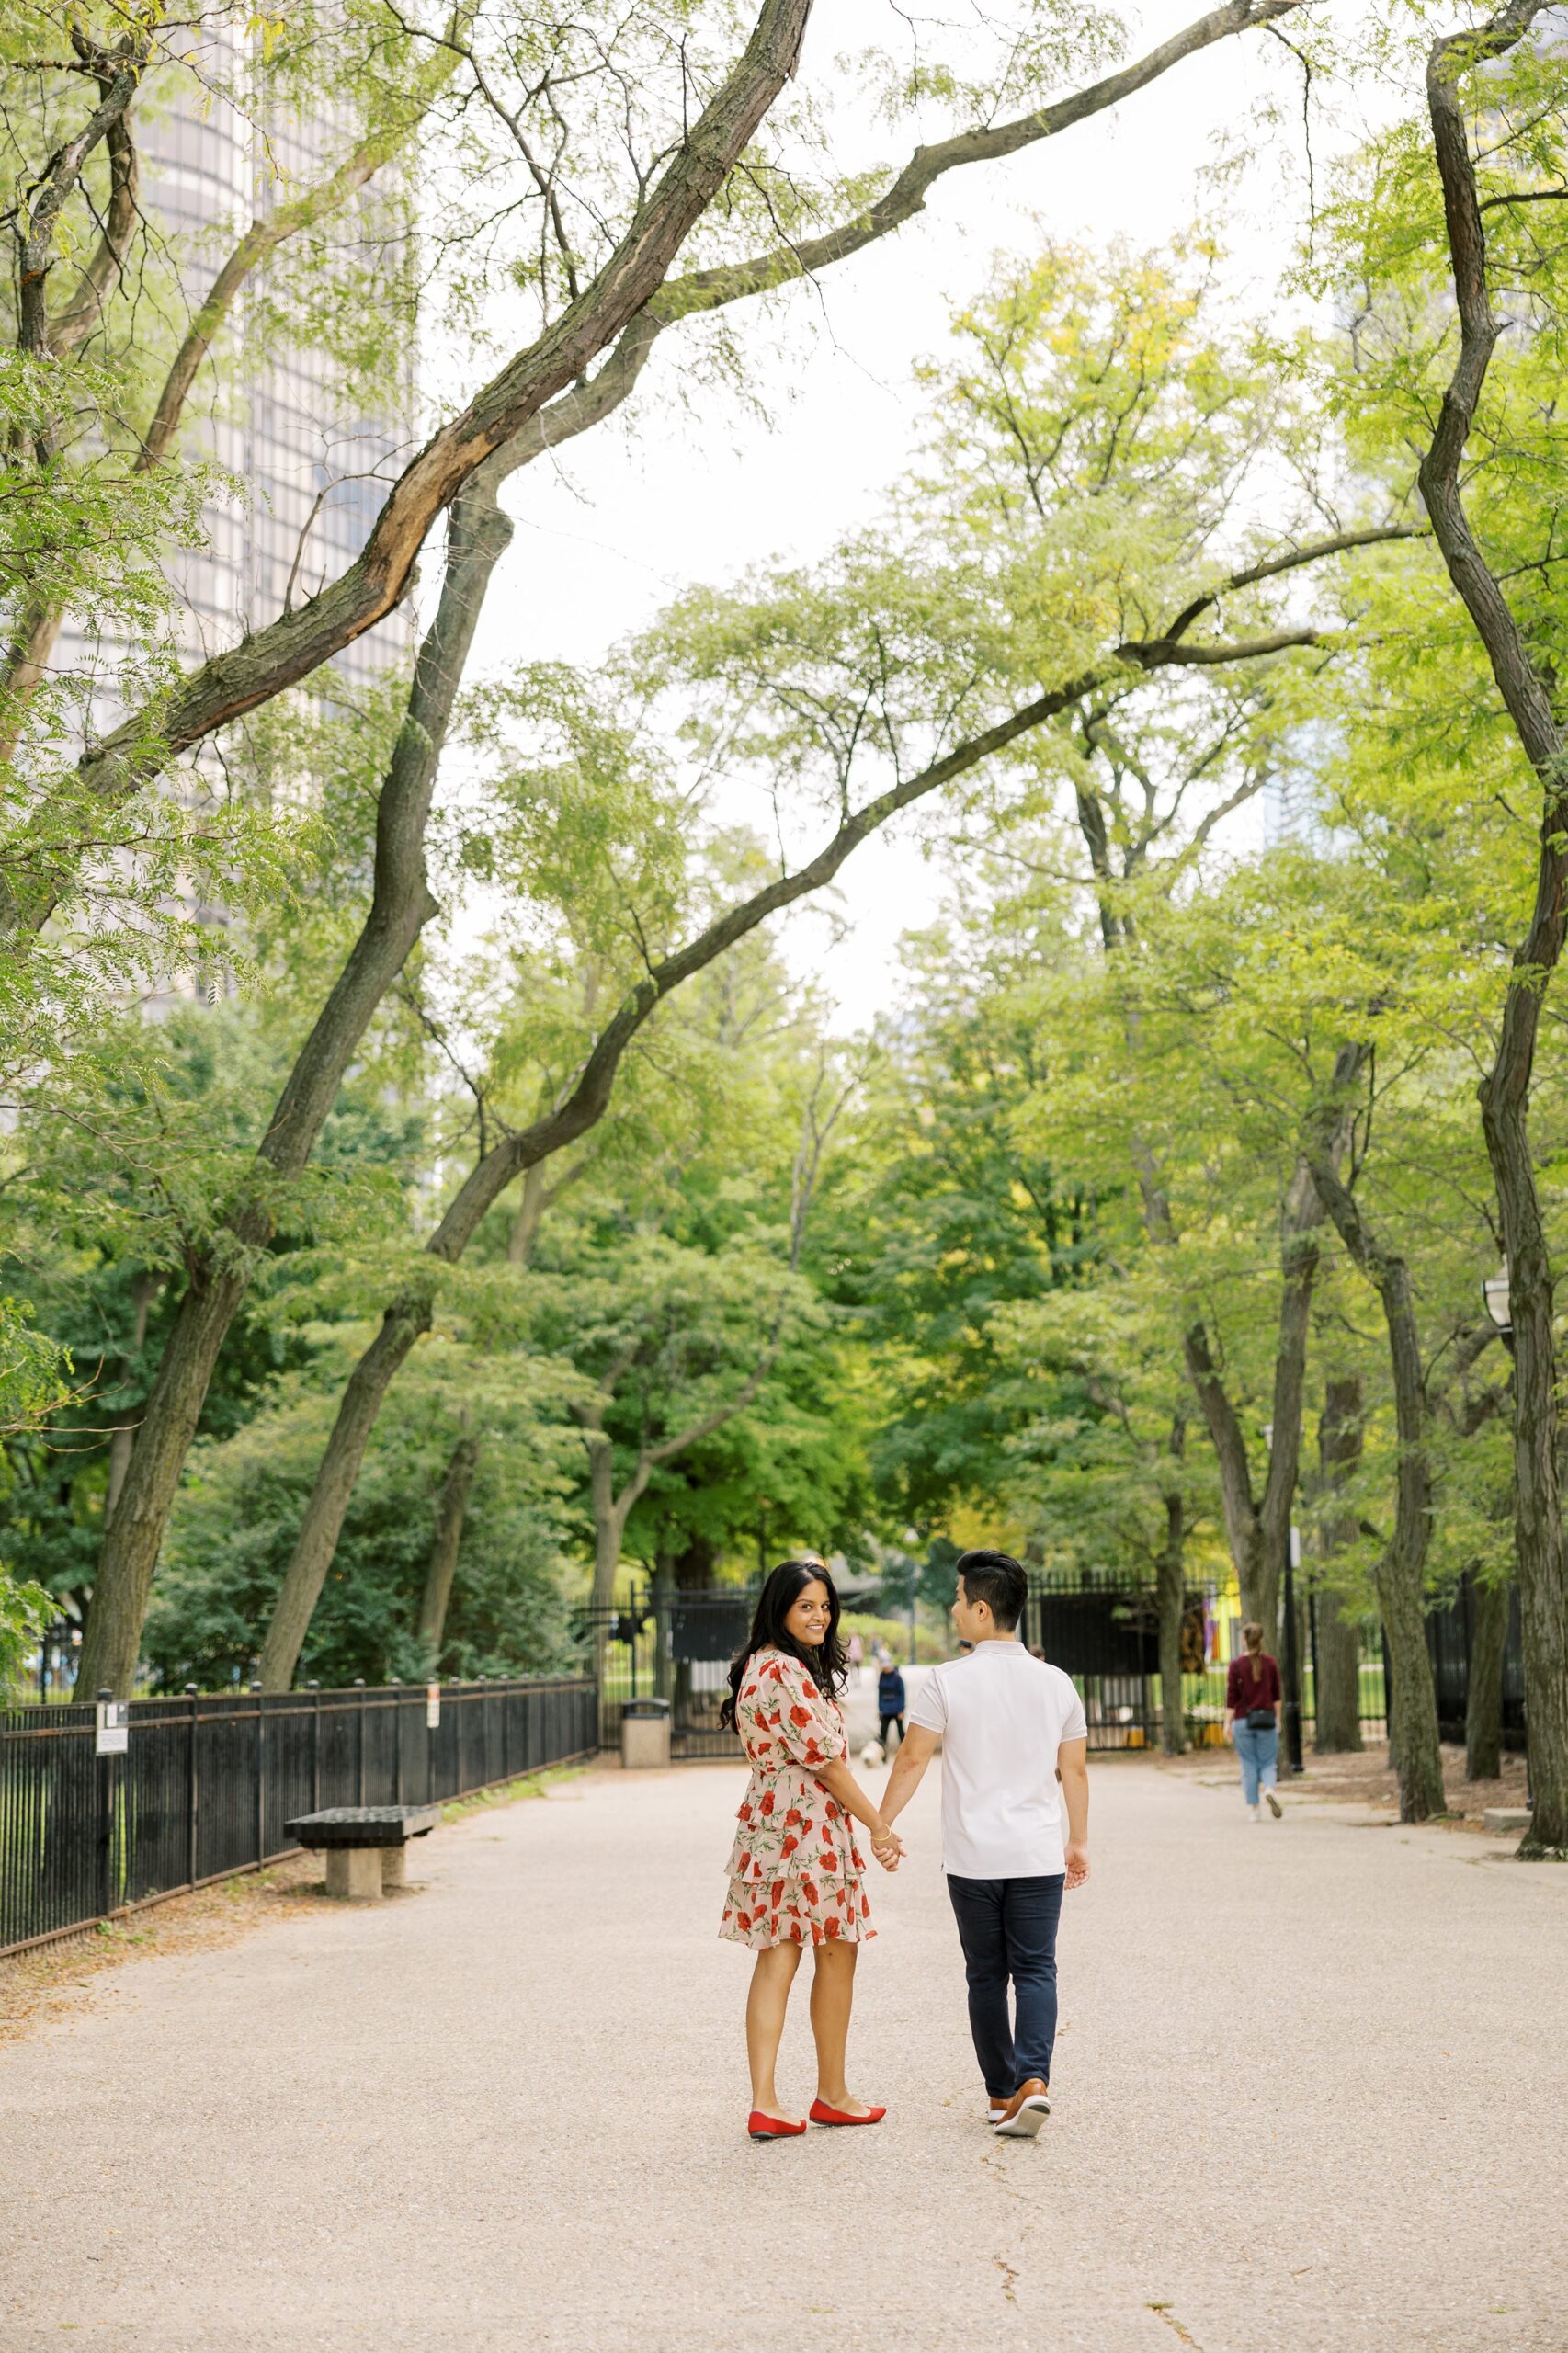 man and woman walk in a park during chicago engagement photo shoot outdoors